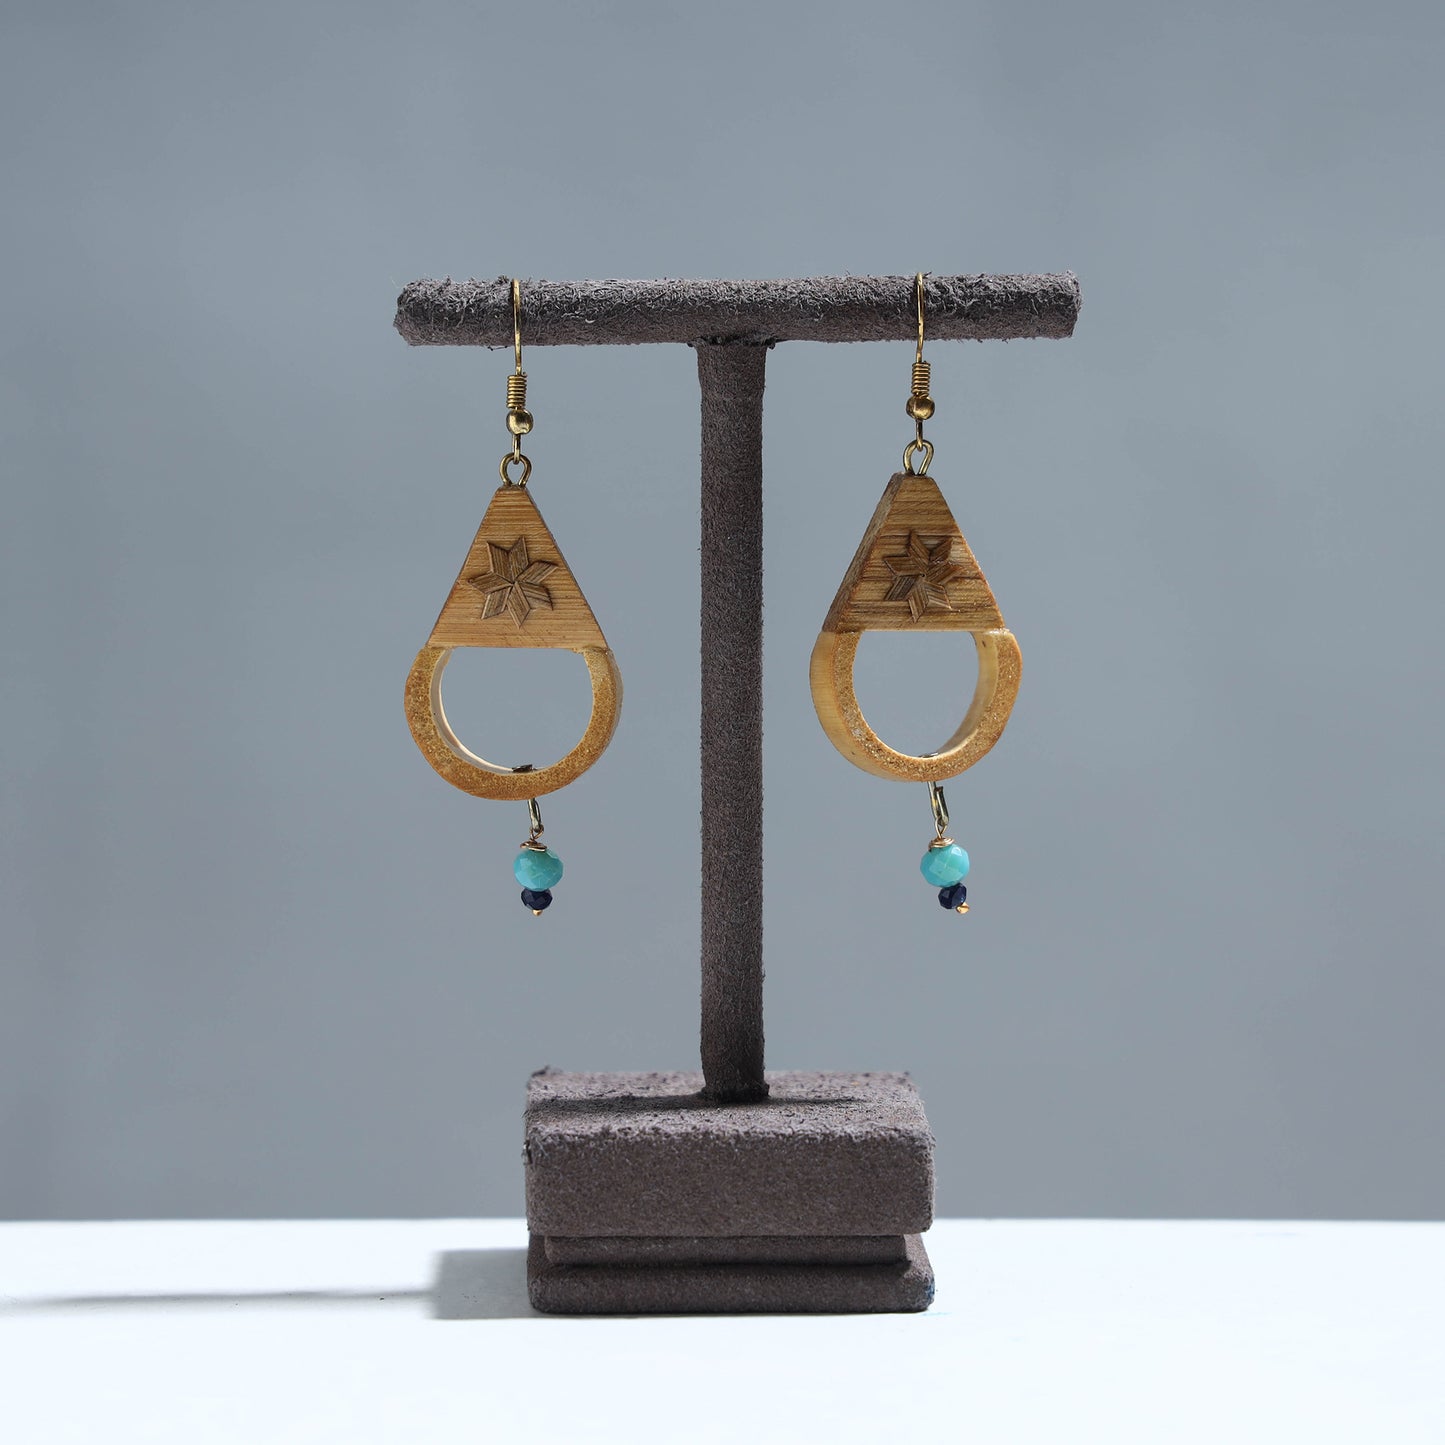 Handcrafted Scoop Shaped Bamboo Earrings